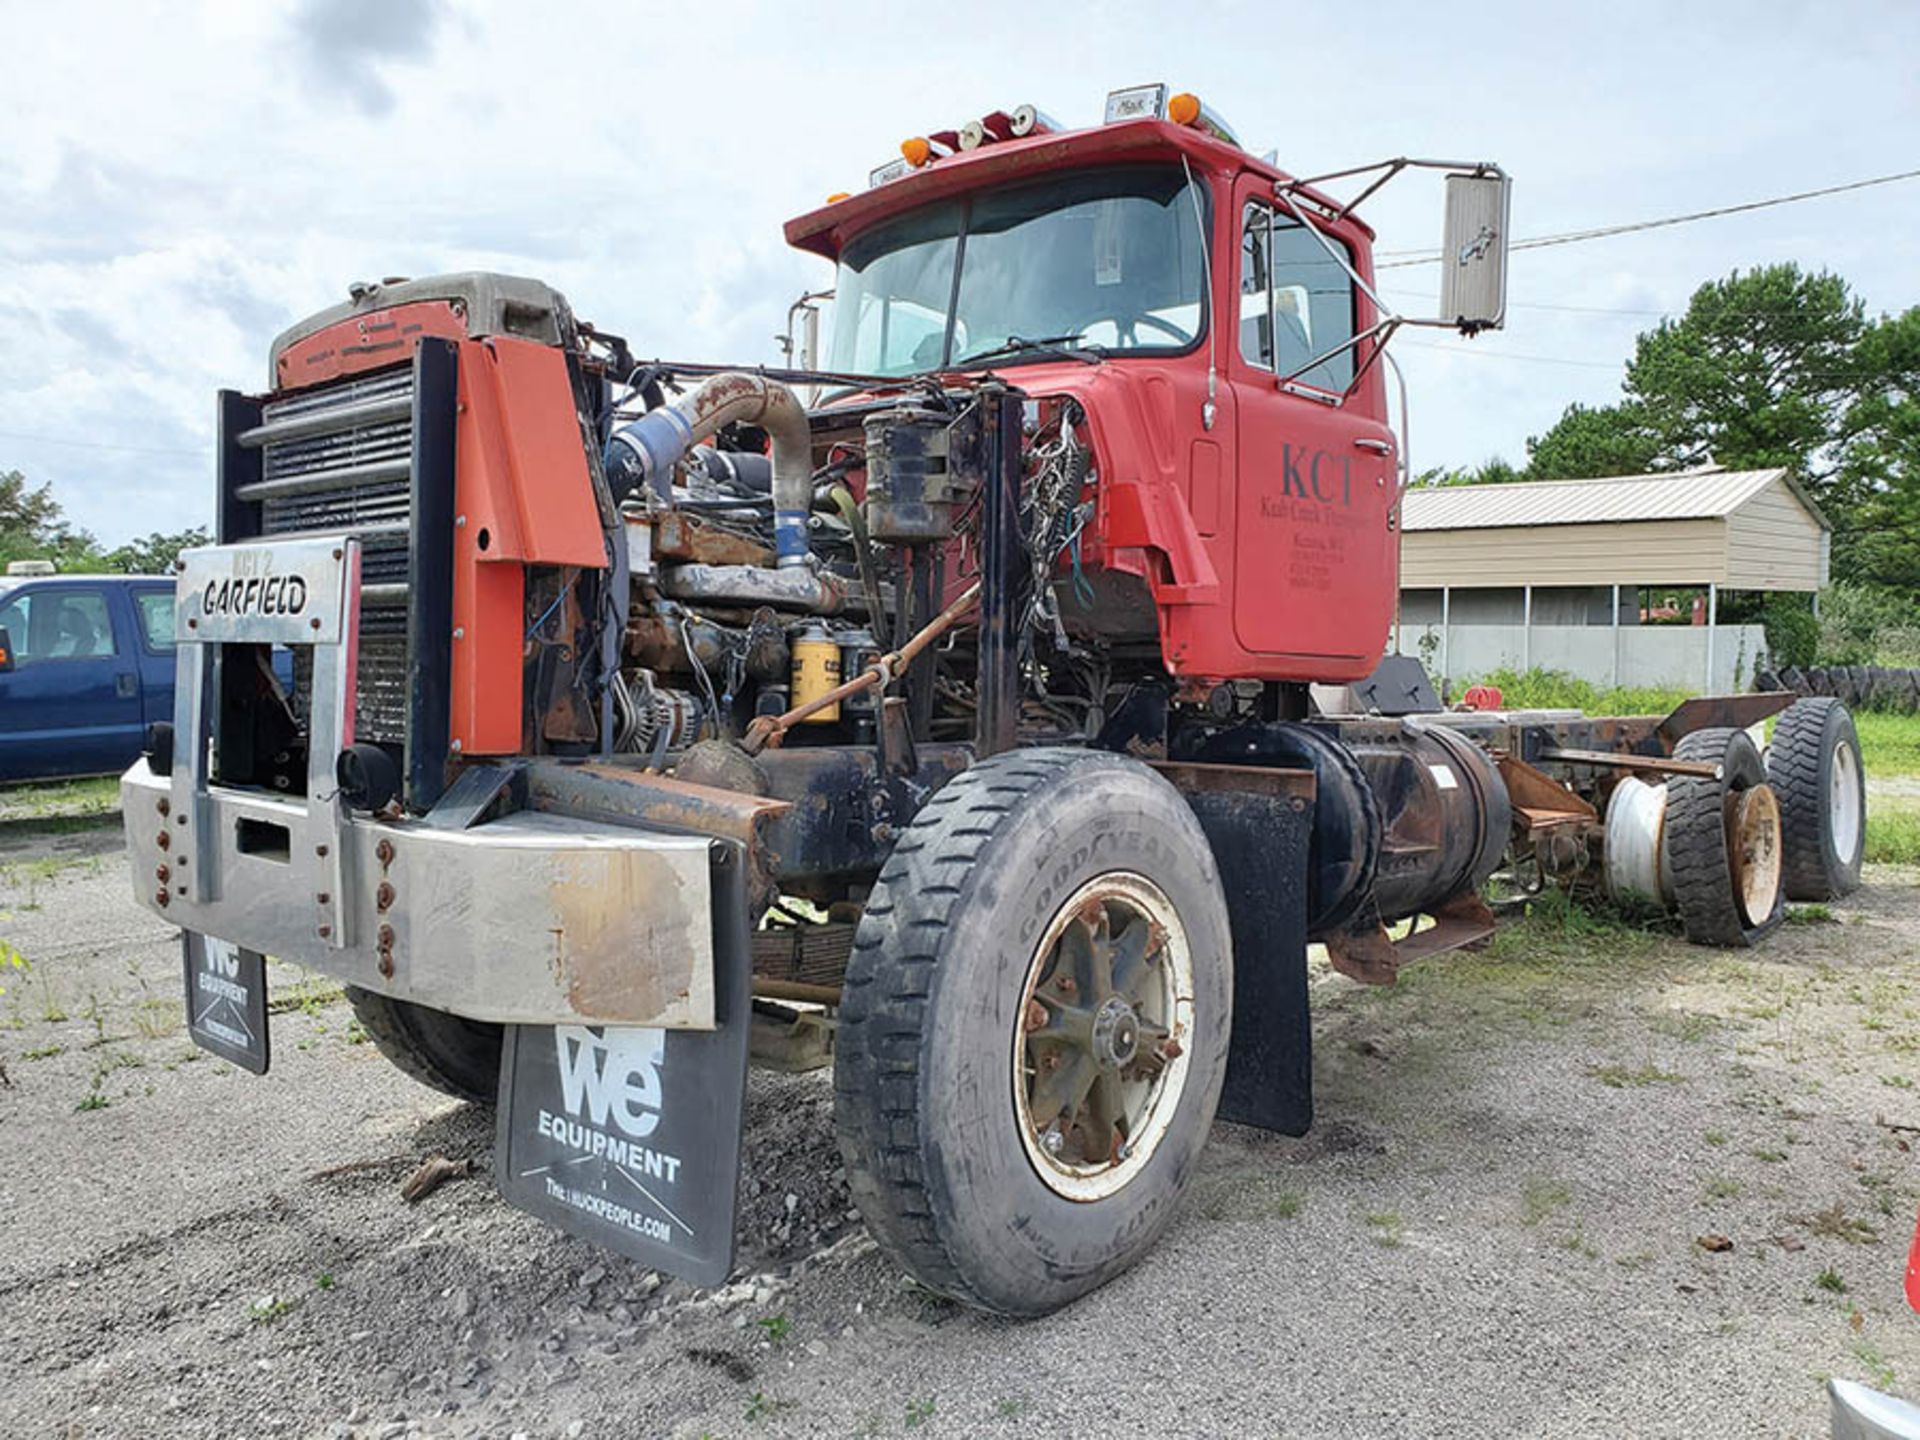 MACK T/A DAY CAB TRACTOR, MACK INLINE SIX DIESEL ENGINE, KCT 2, LOCATION: MARCO SHOP